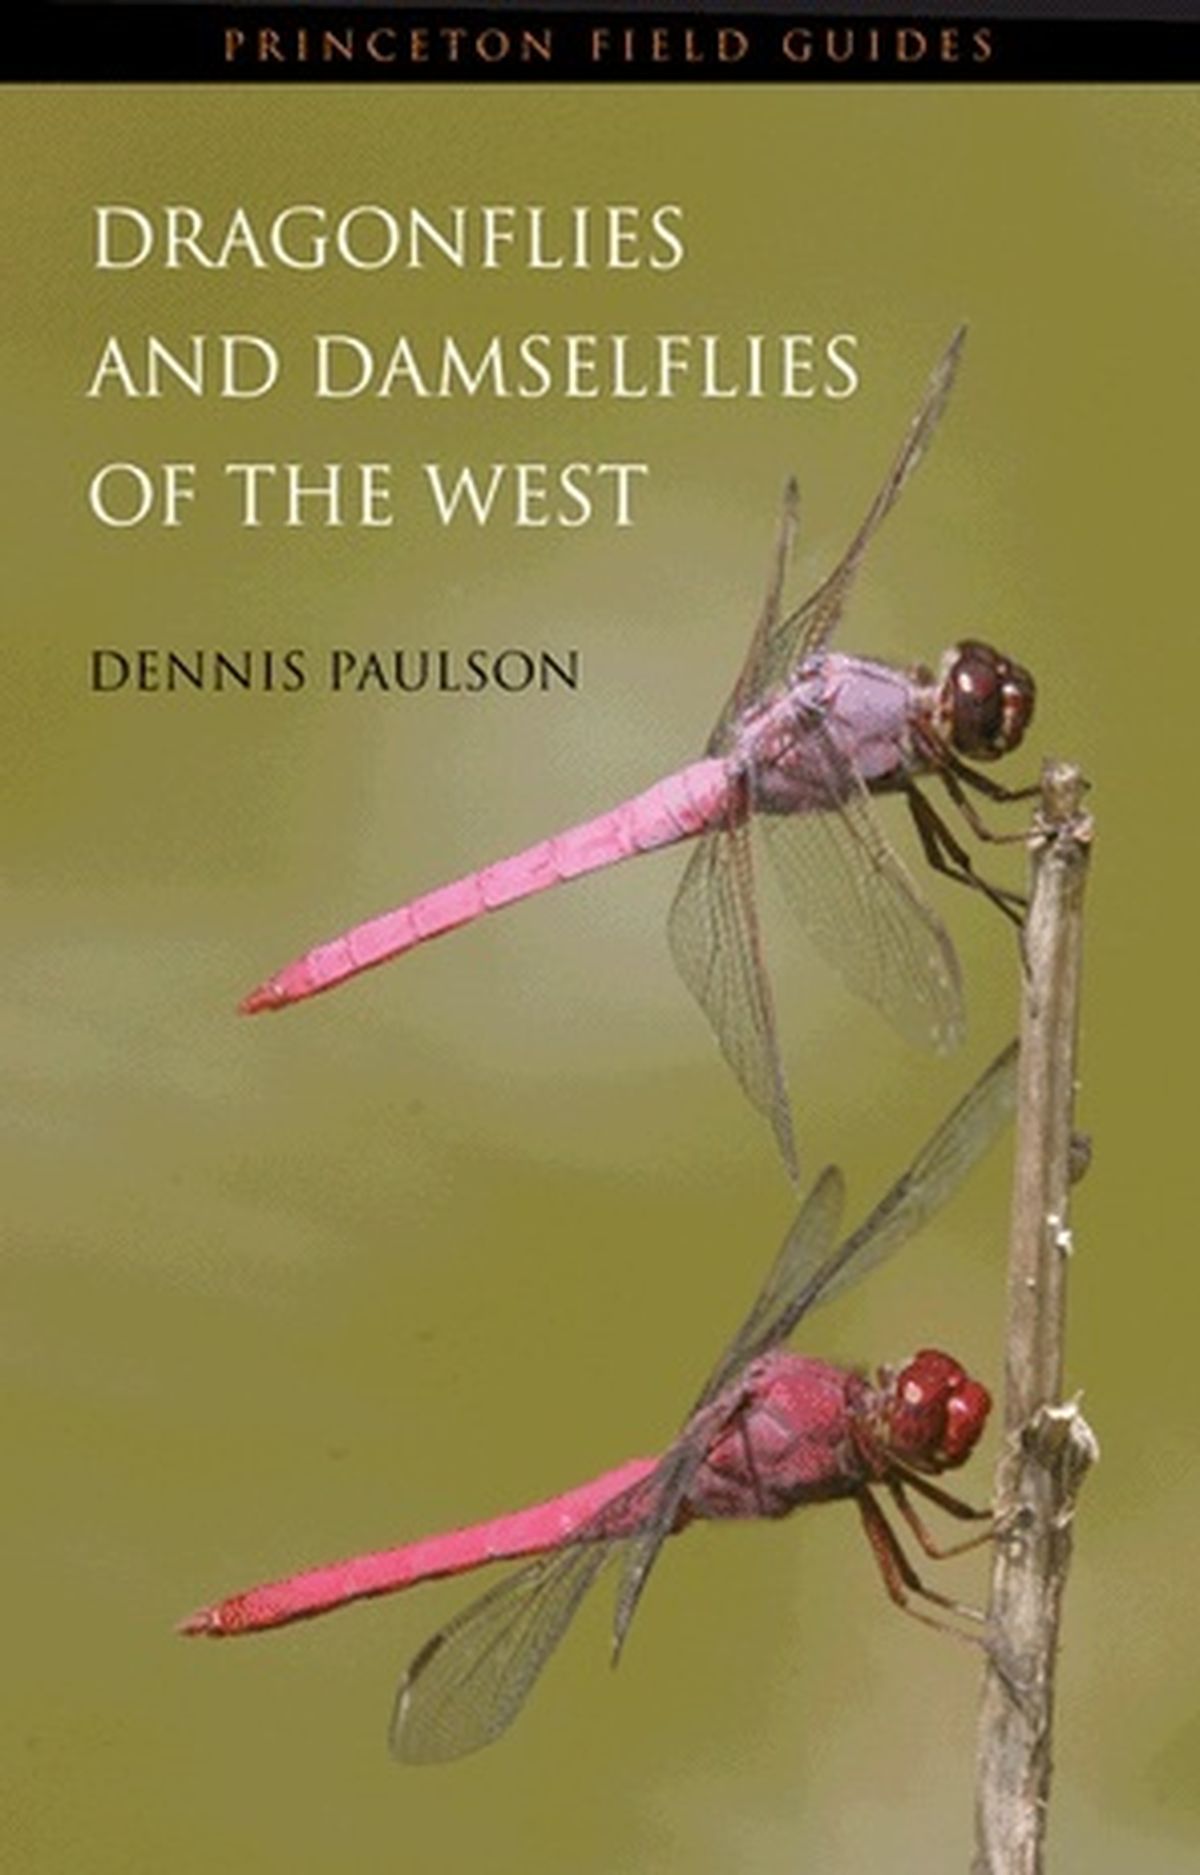 This field book by Dennis Paulson is the first fully illustrated field guide to all 348 species of dragonflies and damselflies in western North America. (Courtesy photo)